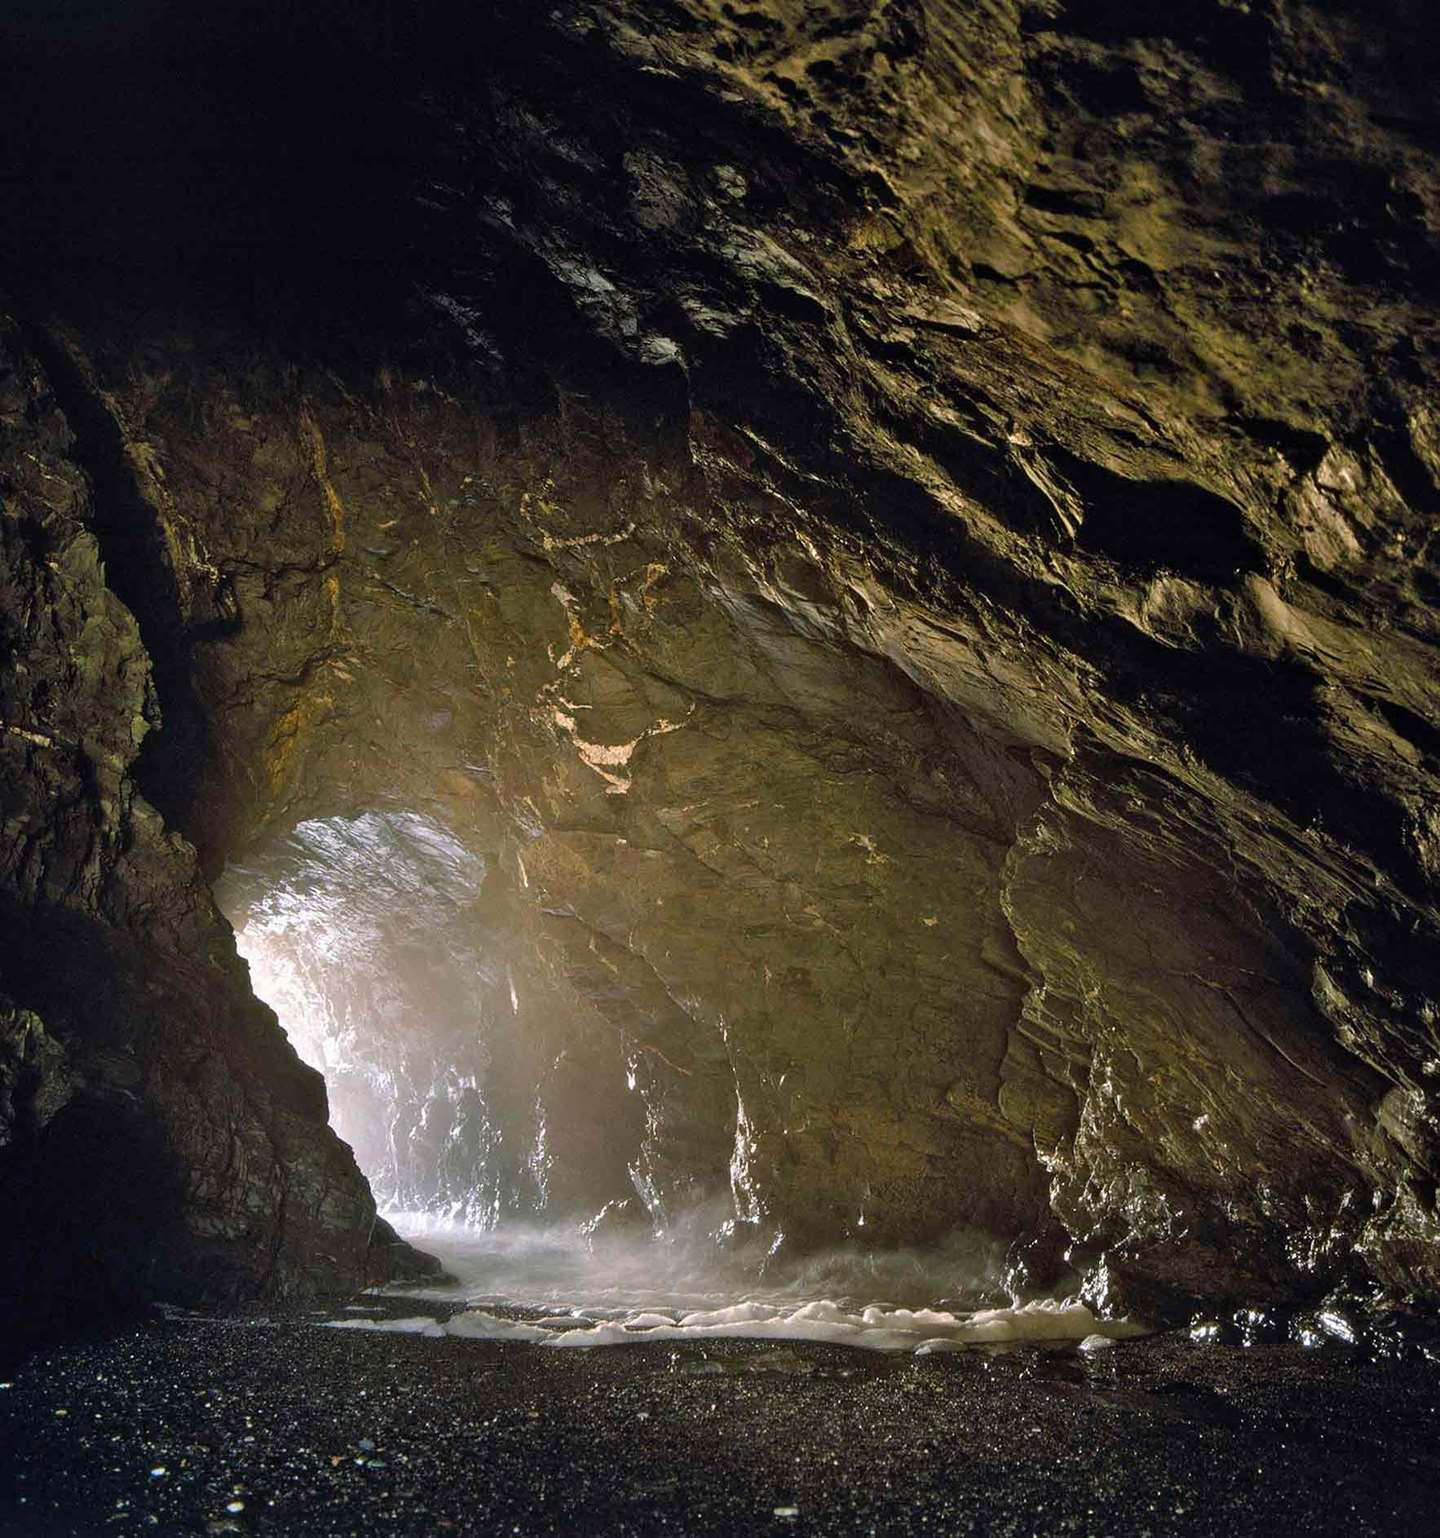 The cavern on the west side of the Haven beach, which has been known since the late 19th century as Merlin’s Cave